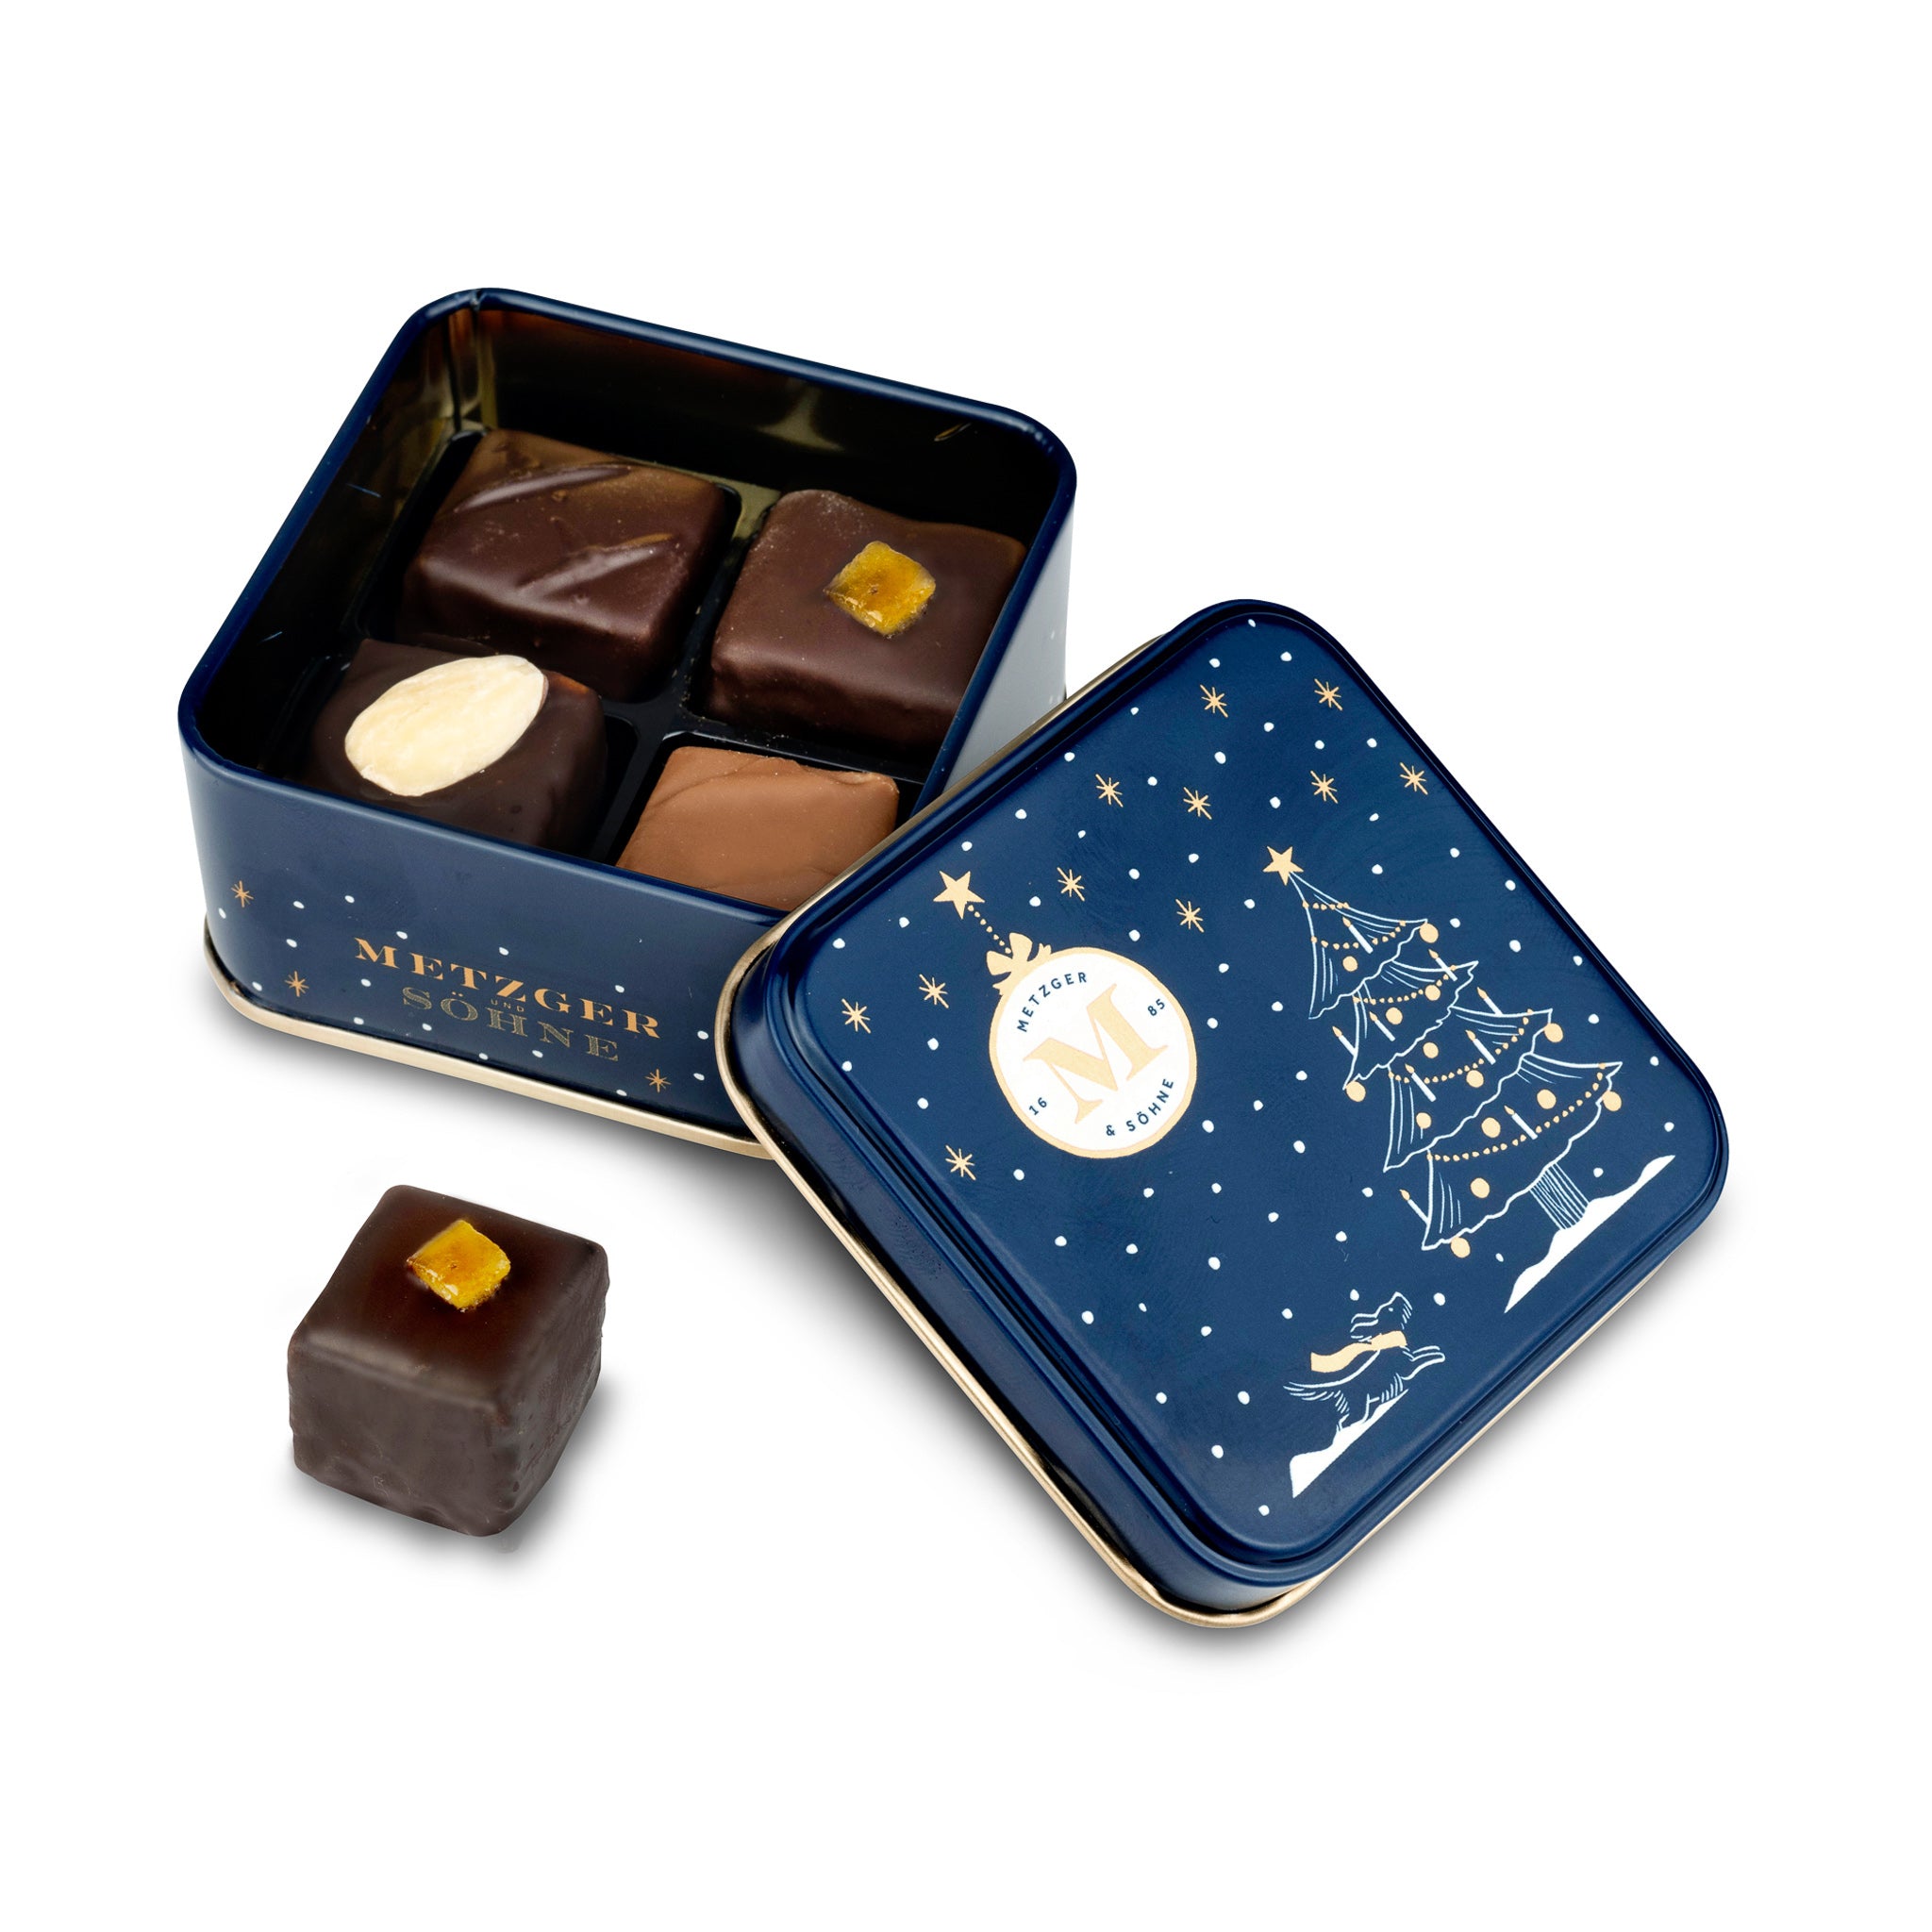 Adorable Lebkuchen 'honey cake' Christmas tin in navy filled with 4 different Lebkuchen pralines.